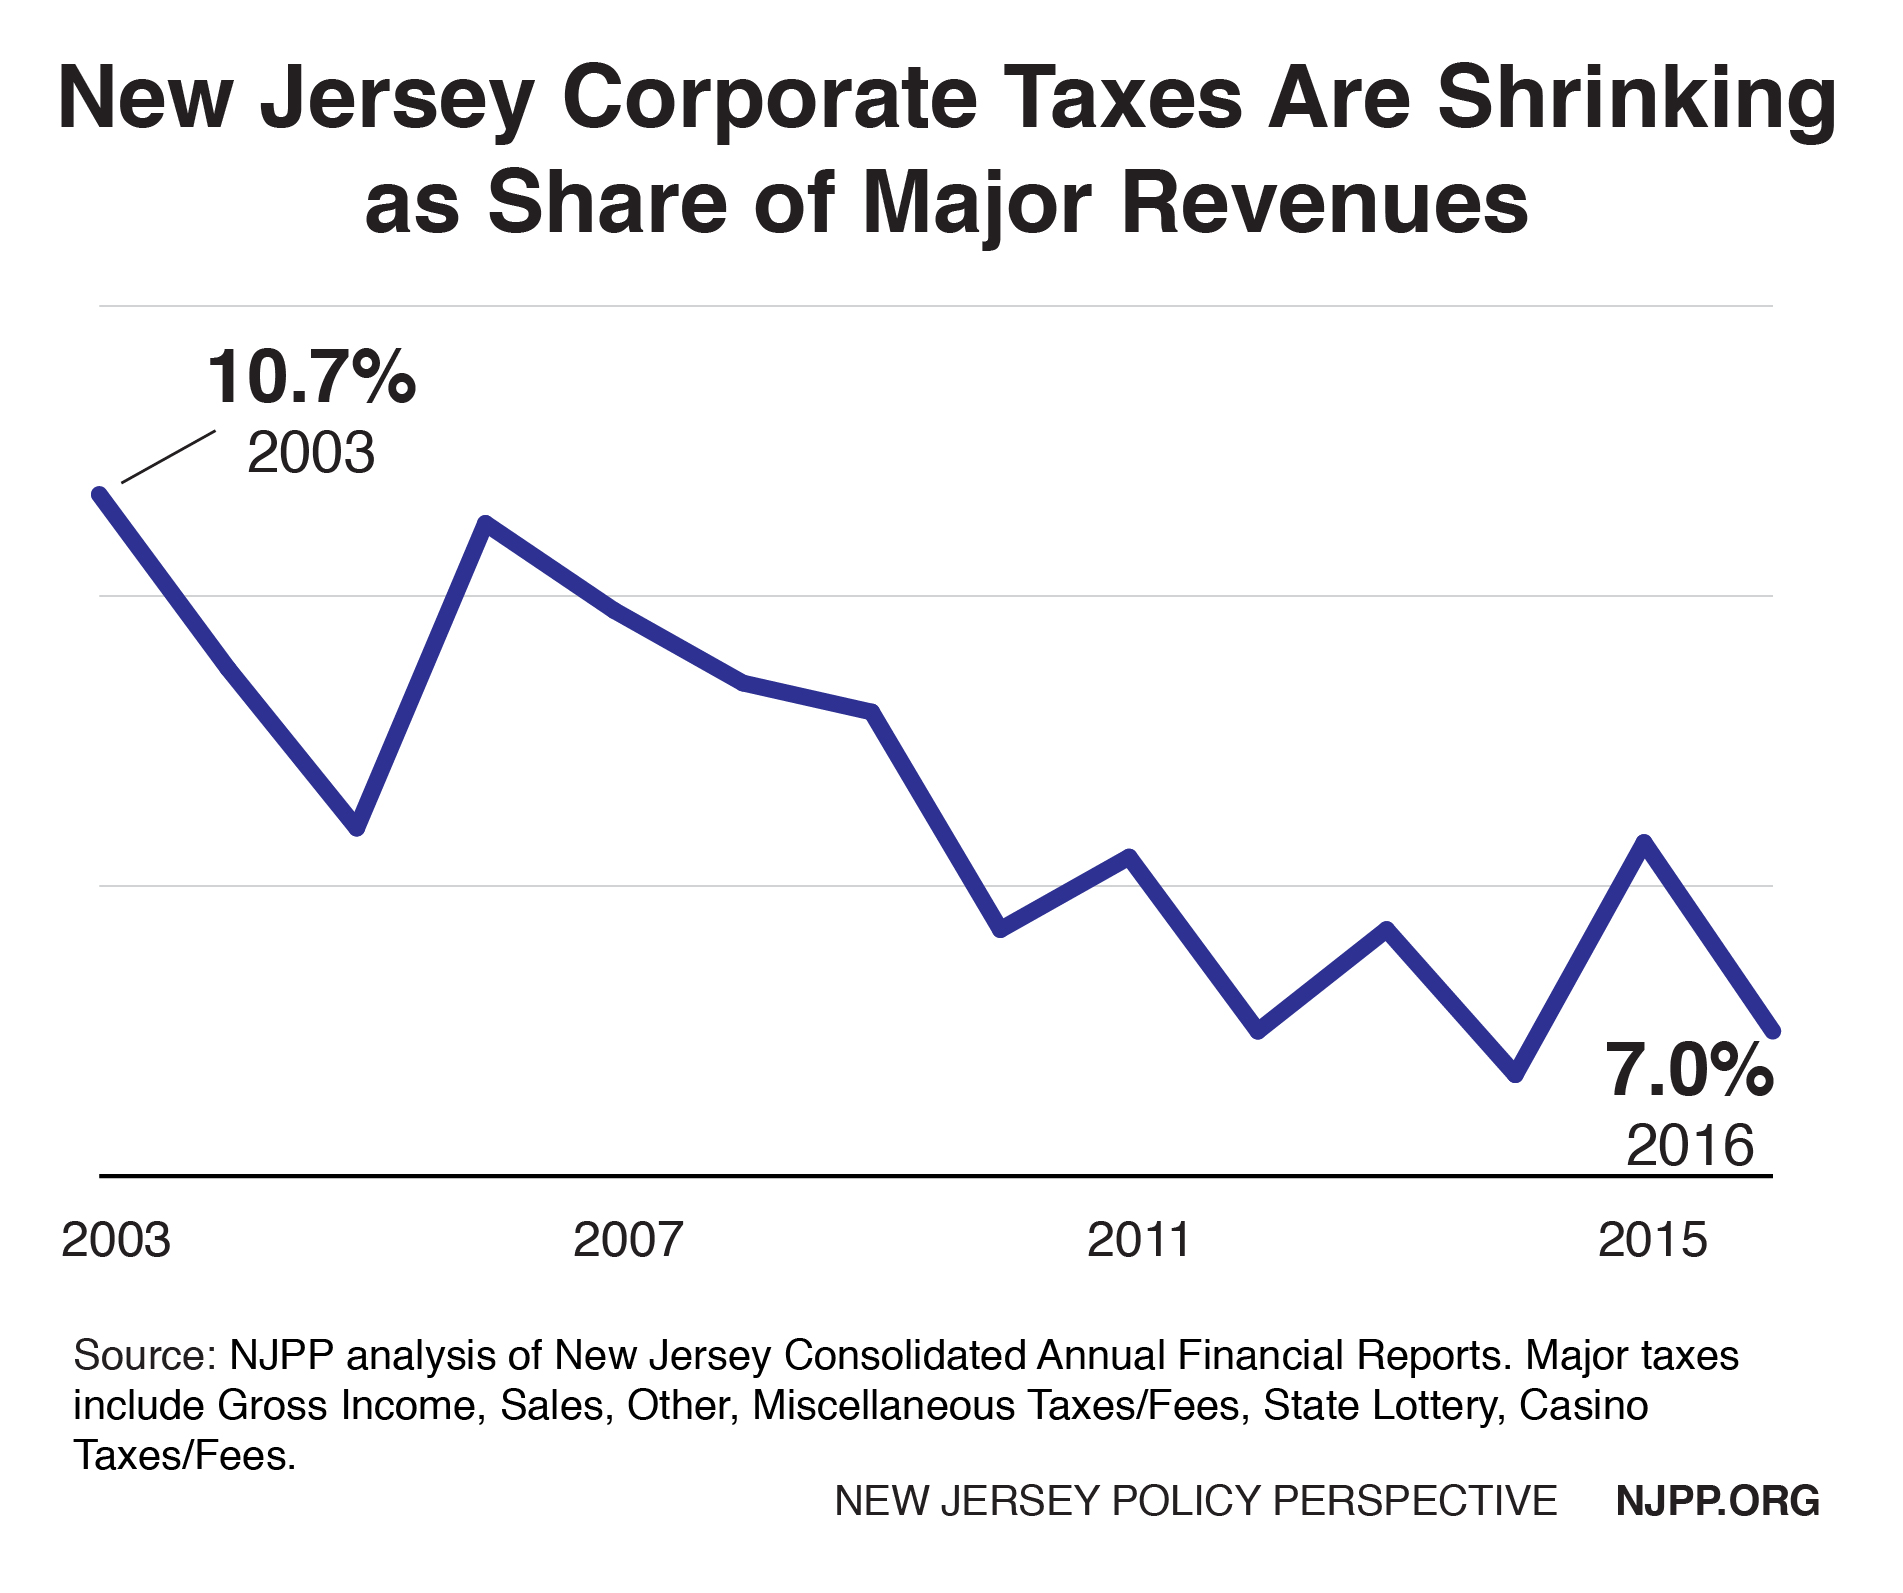 state of new jersey sales tax rate